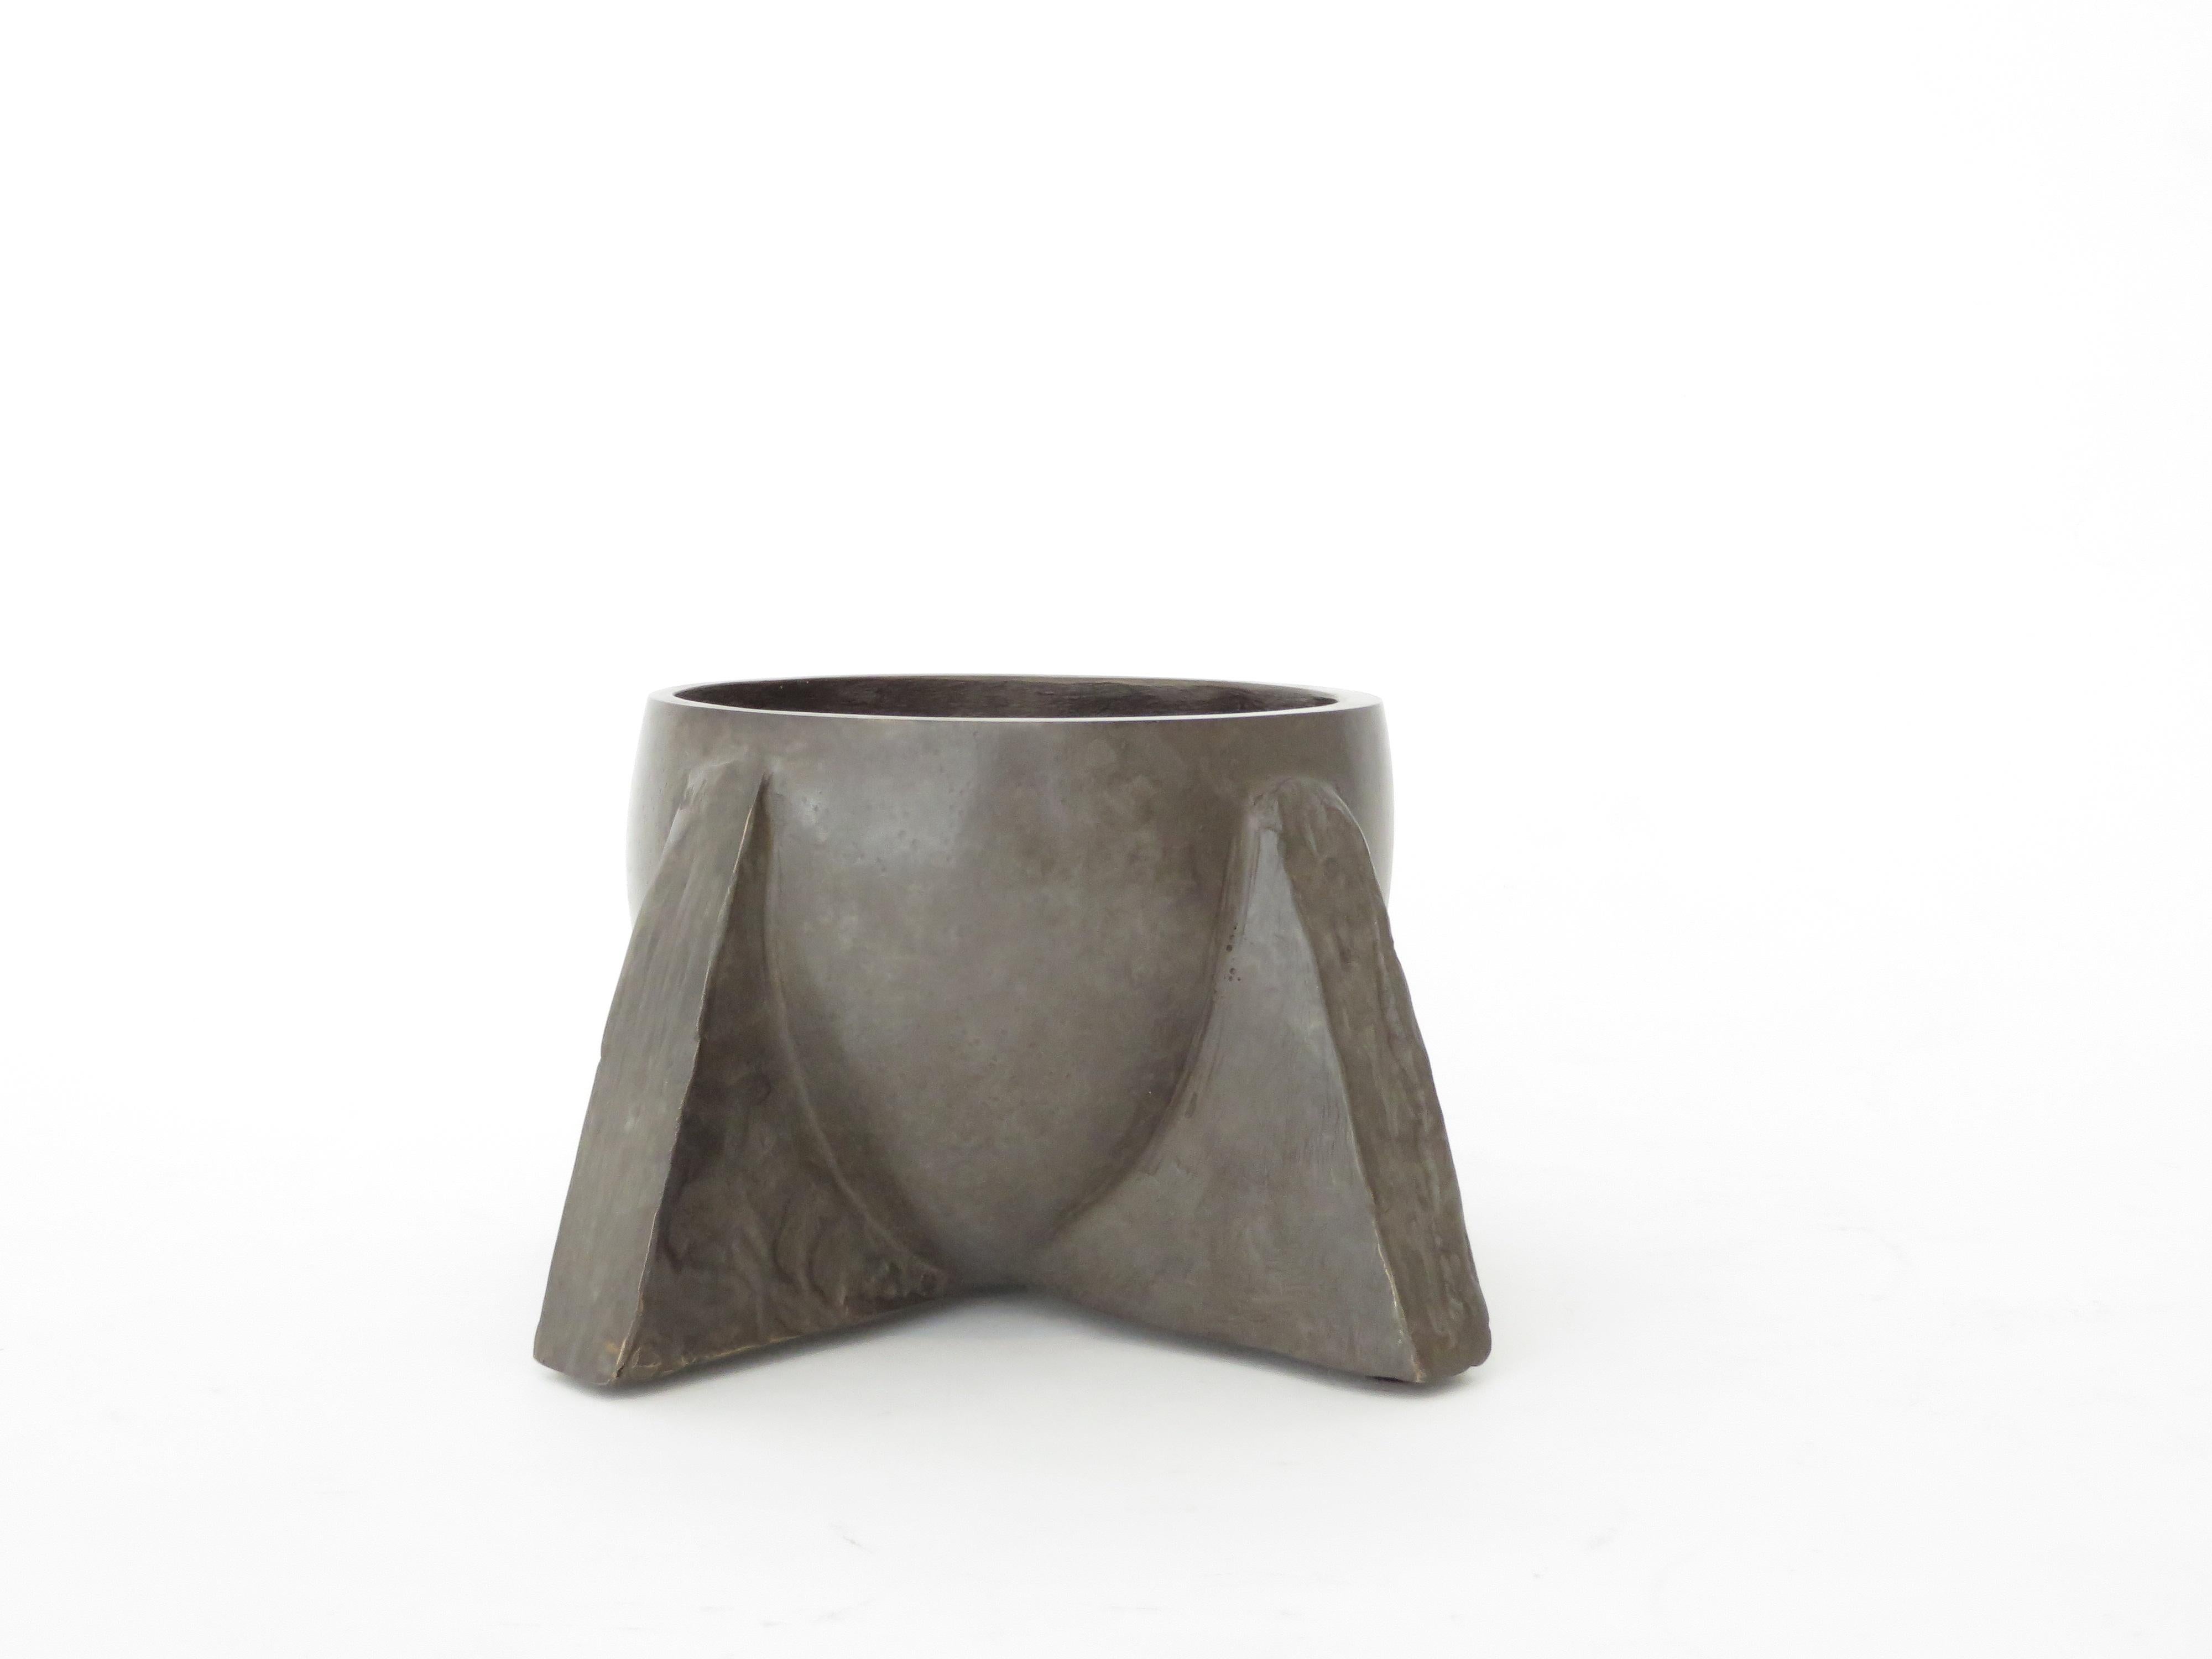 The now iconic bronze coupe vase from the Rick Owens bronze relic collection.
This is shown in the nitrate patina. Each piece is handmade and hand patinated so there is always a slight variation in color.
Designed in 2012. Each bronze is signed.
Can